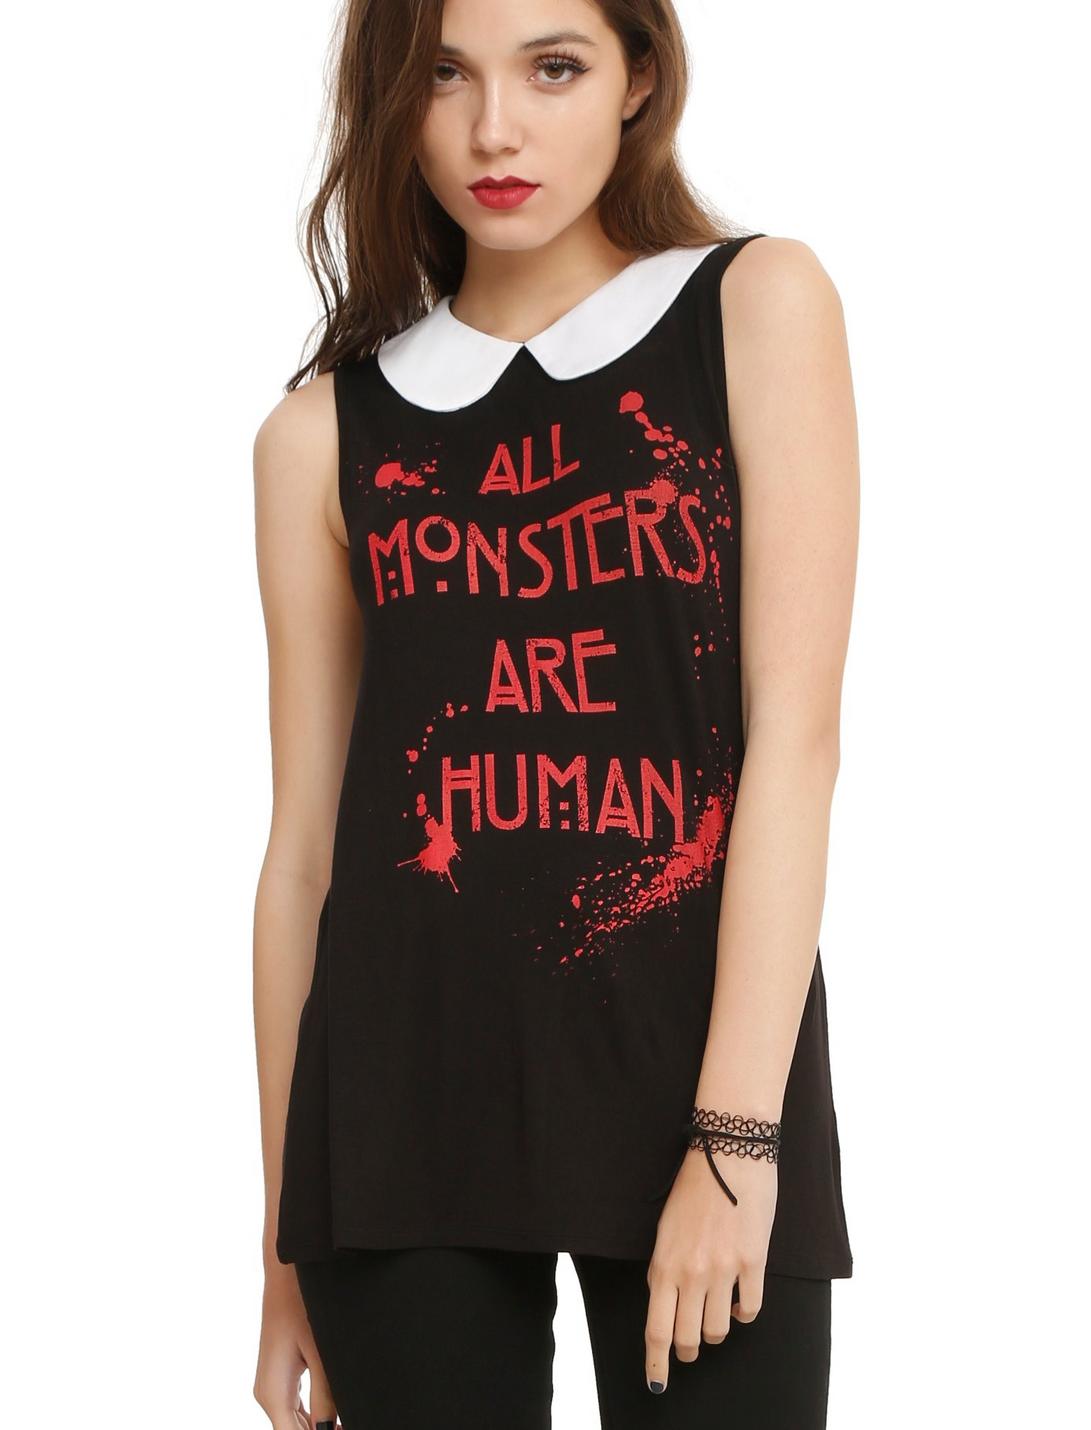 American Horror Story All Monsters Are Human Girls Top, BLACK, hi-res